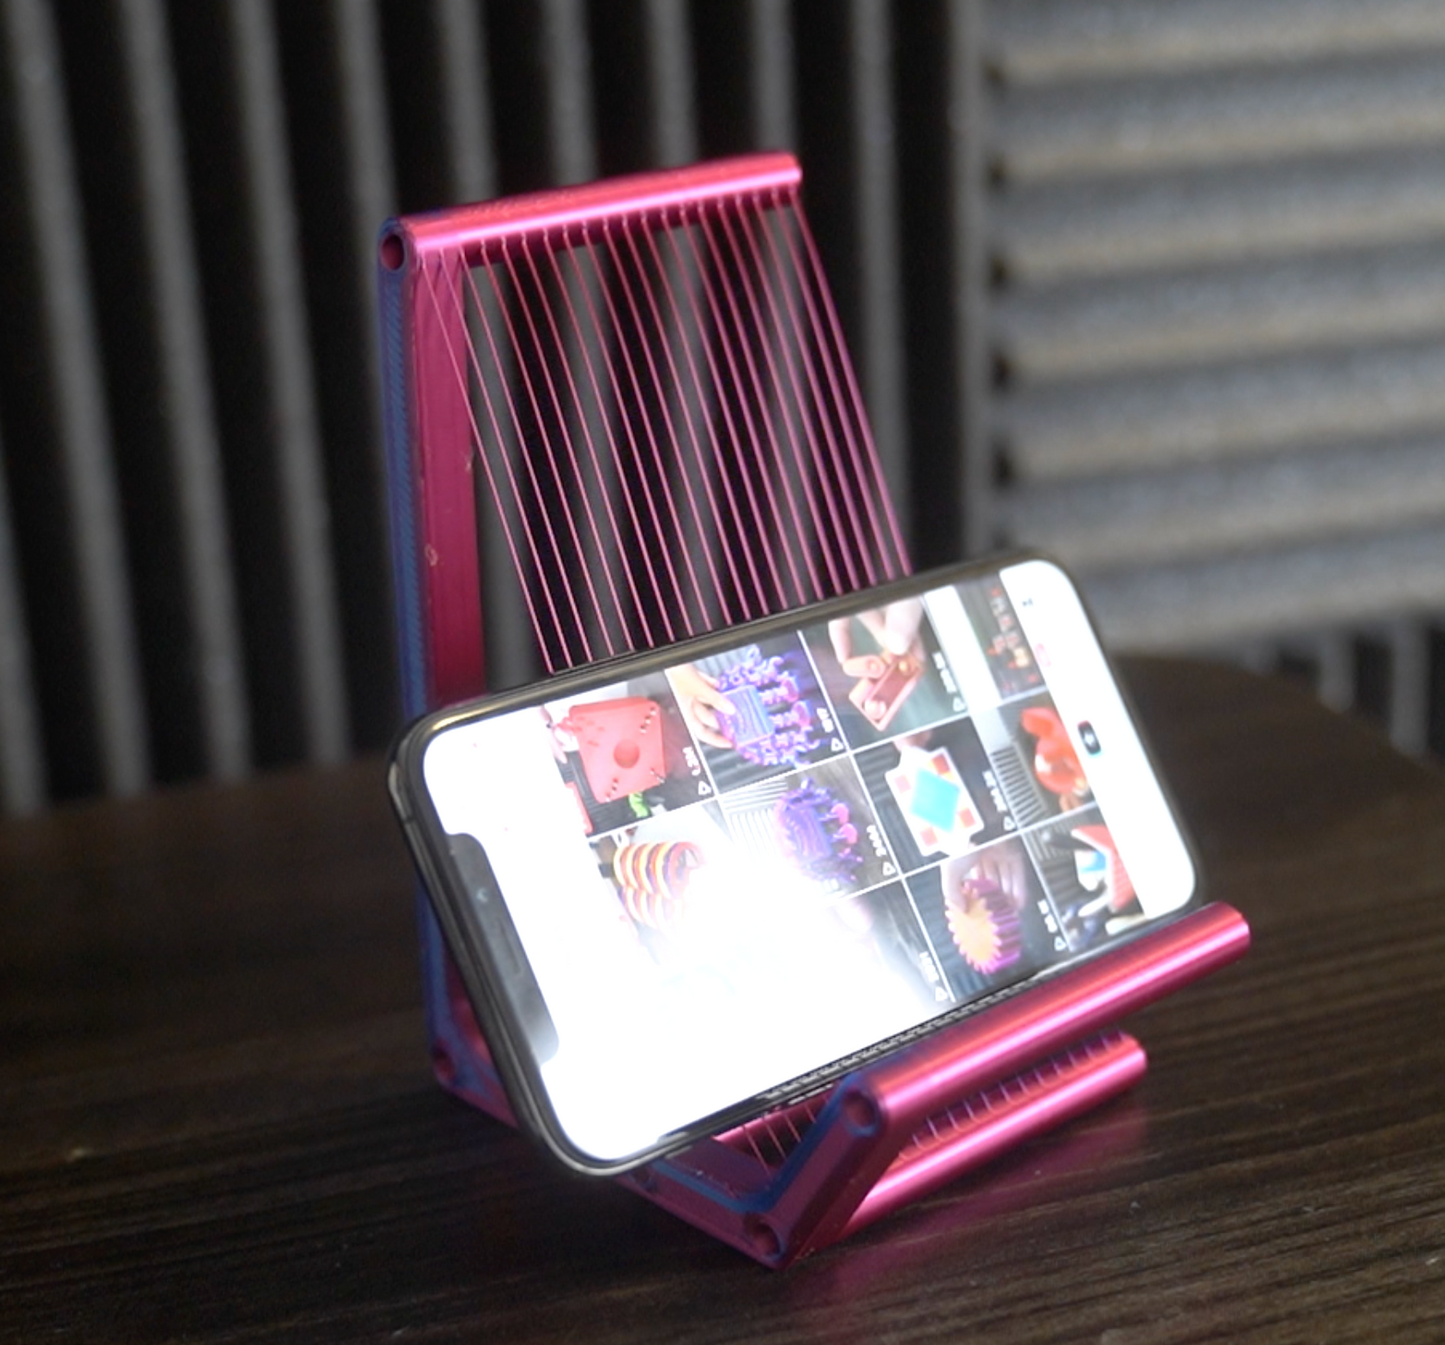 Experimental Tension Strand Phone Stand